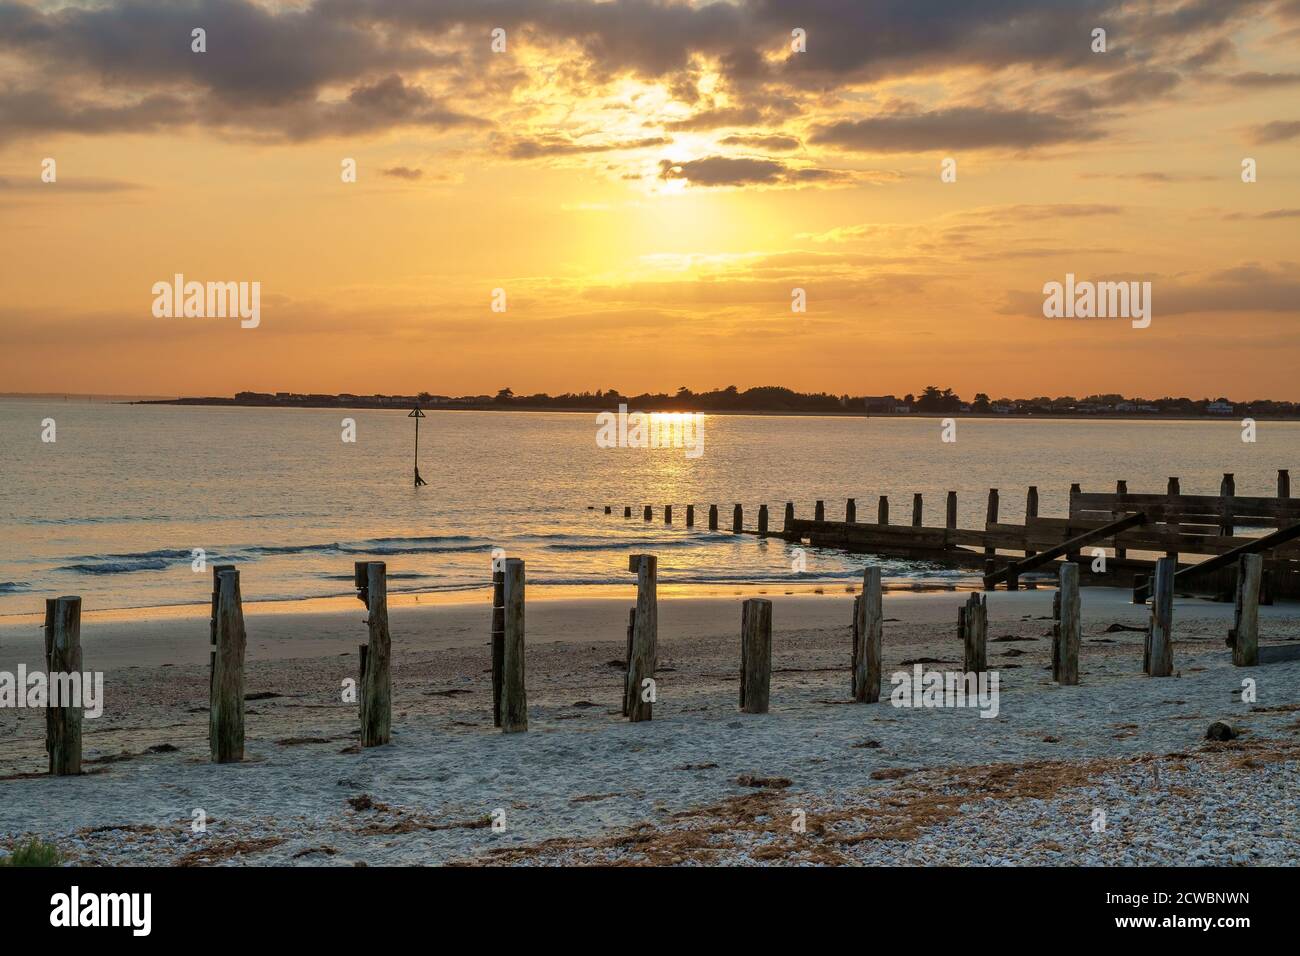 Sunset at East Head, West Wittering, Chichester Harbour, UK. Stock Photo